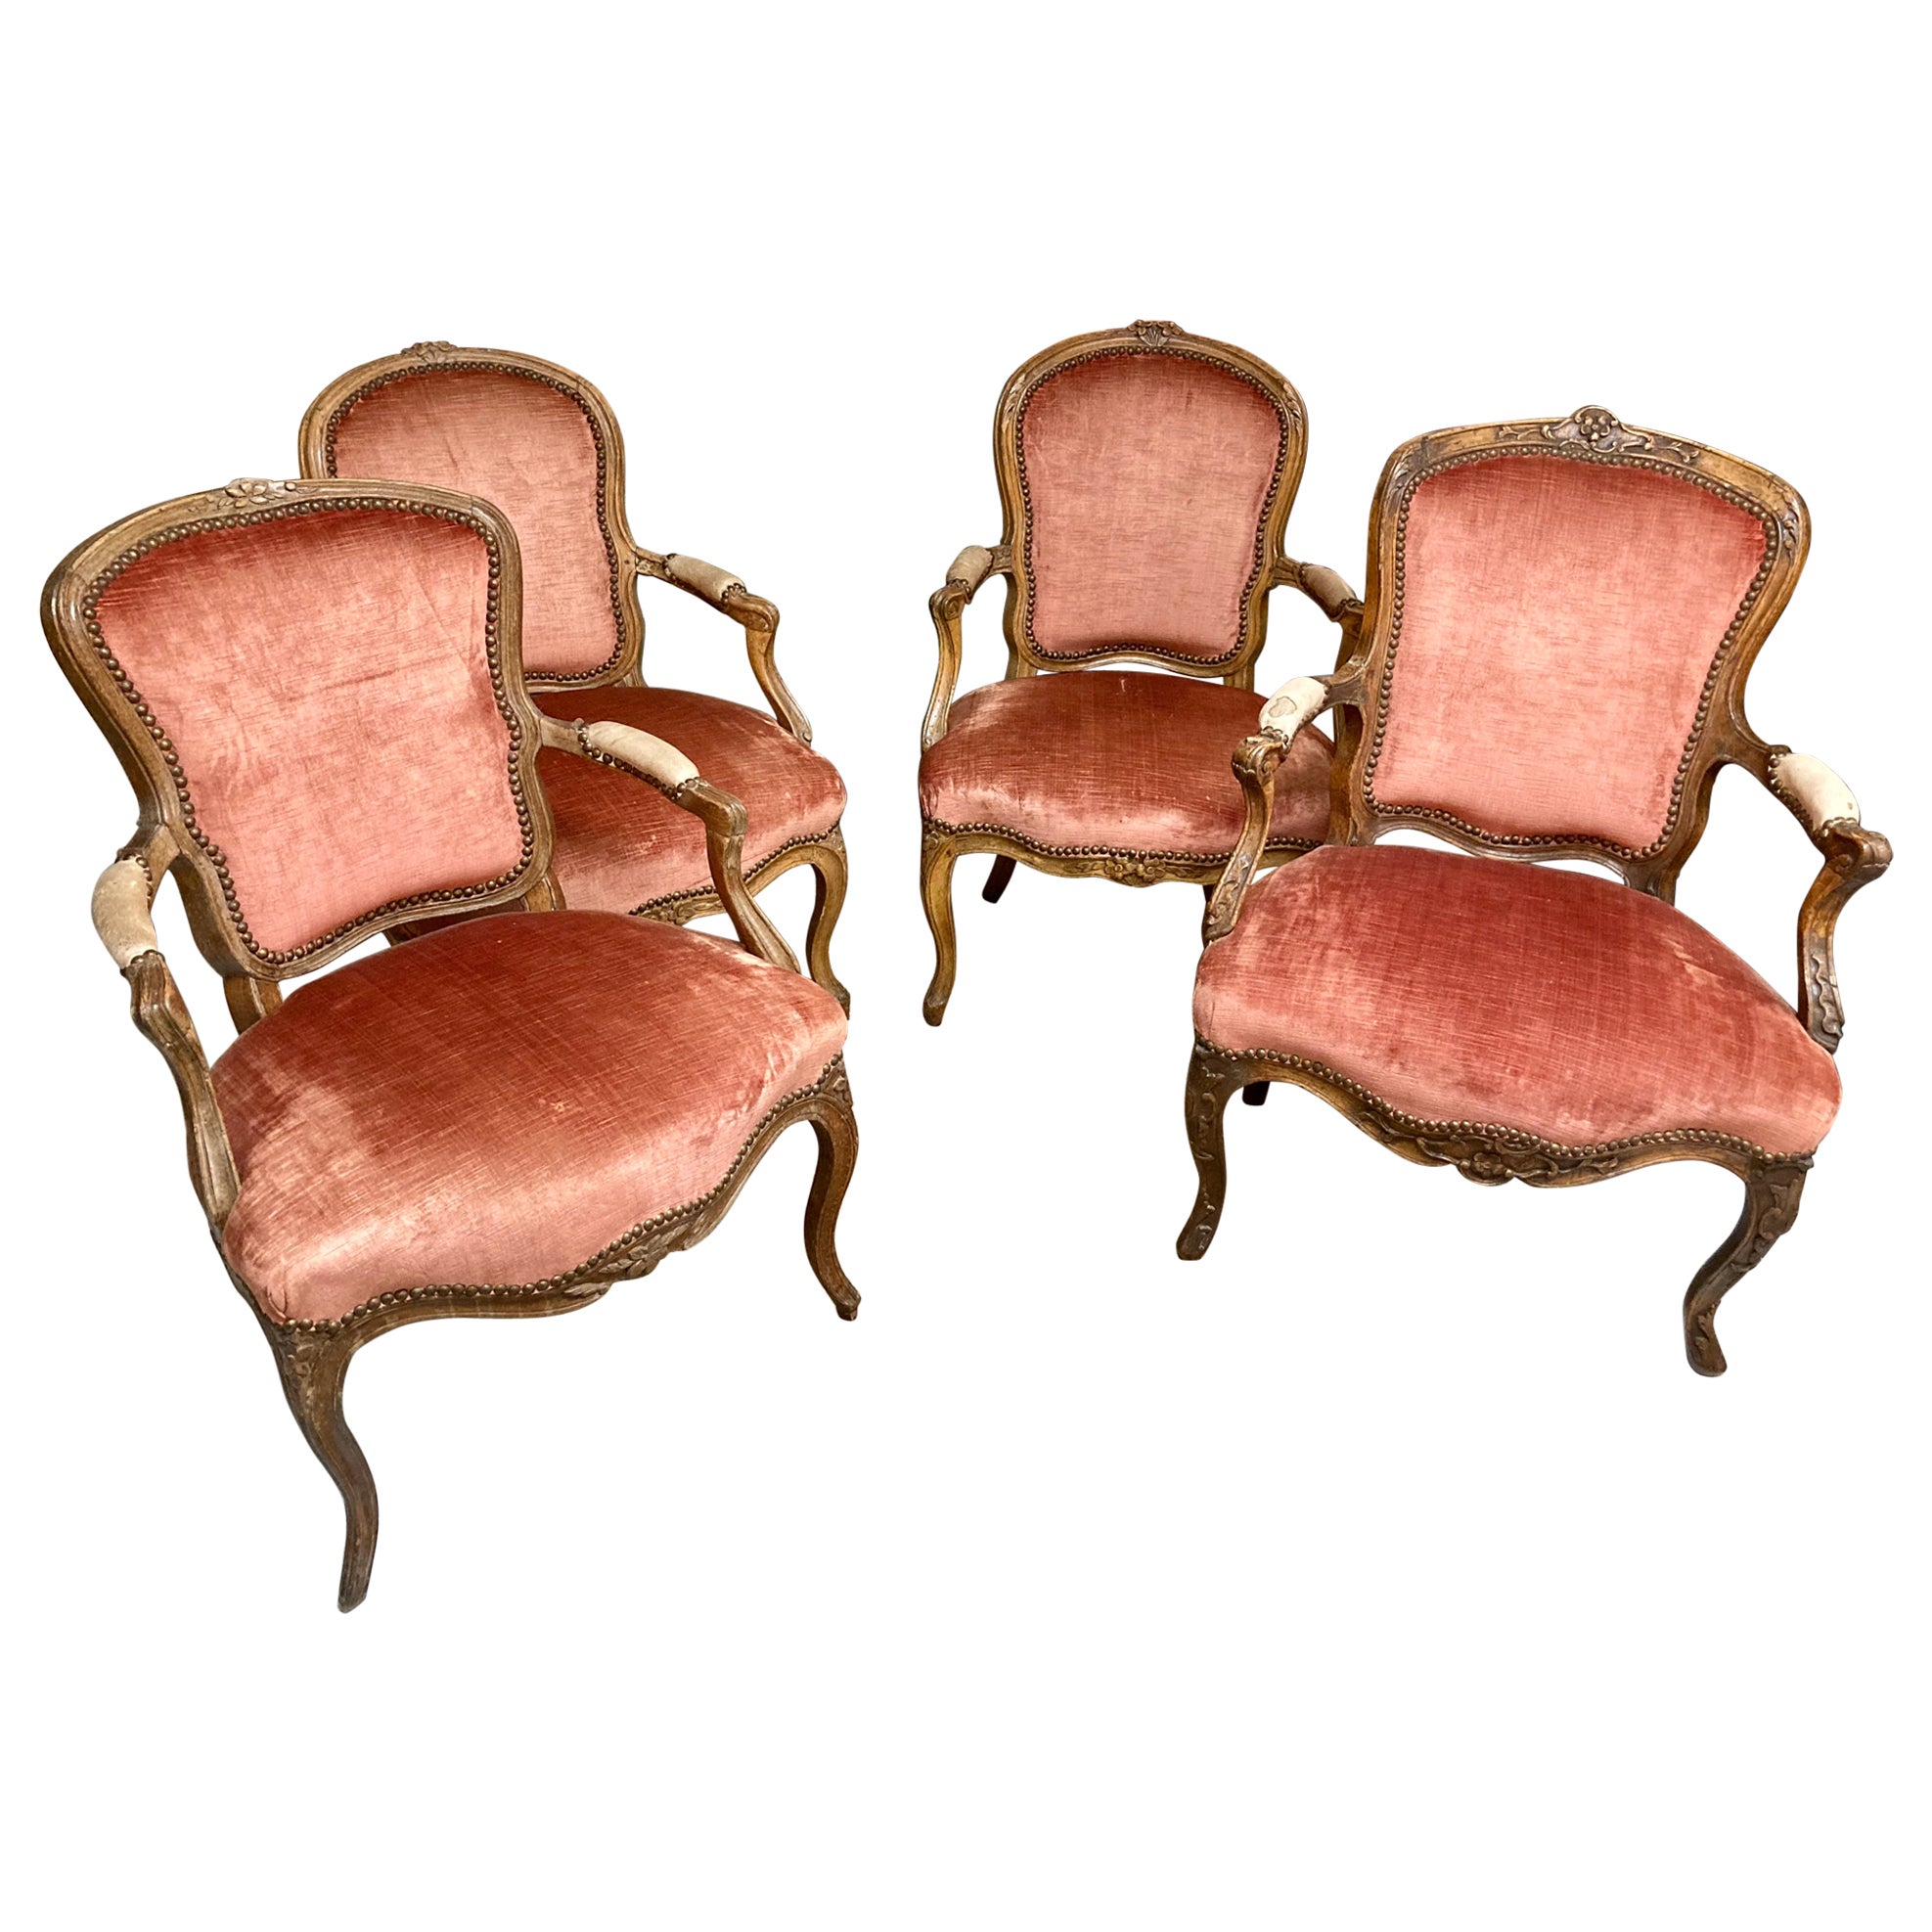 18th C French Louis XV Fauteuil Chairs Each With Unique Carvings - Set of 4 For Sale